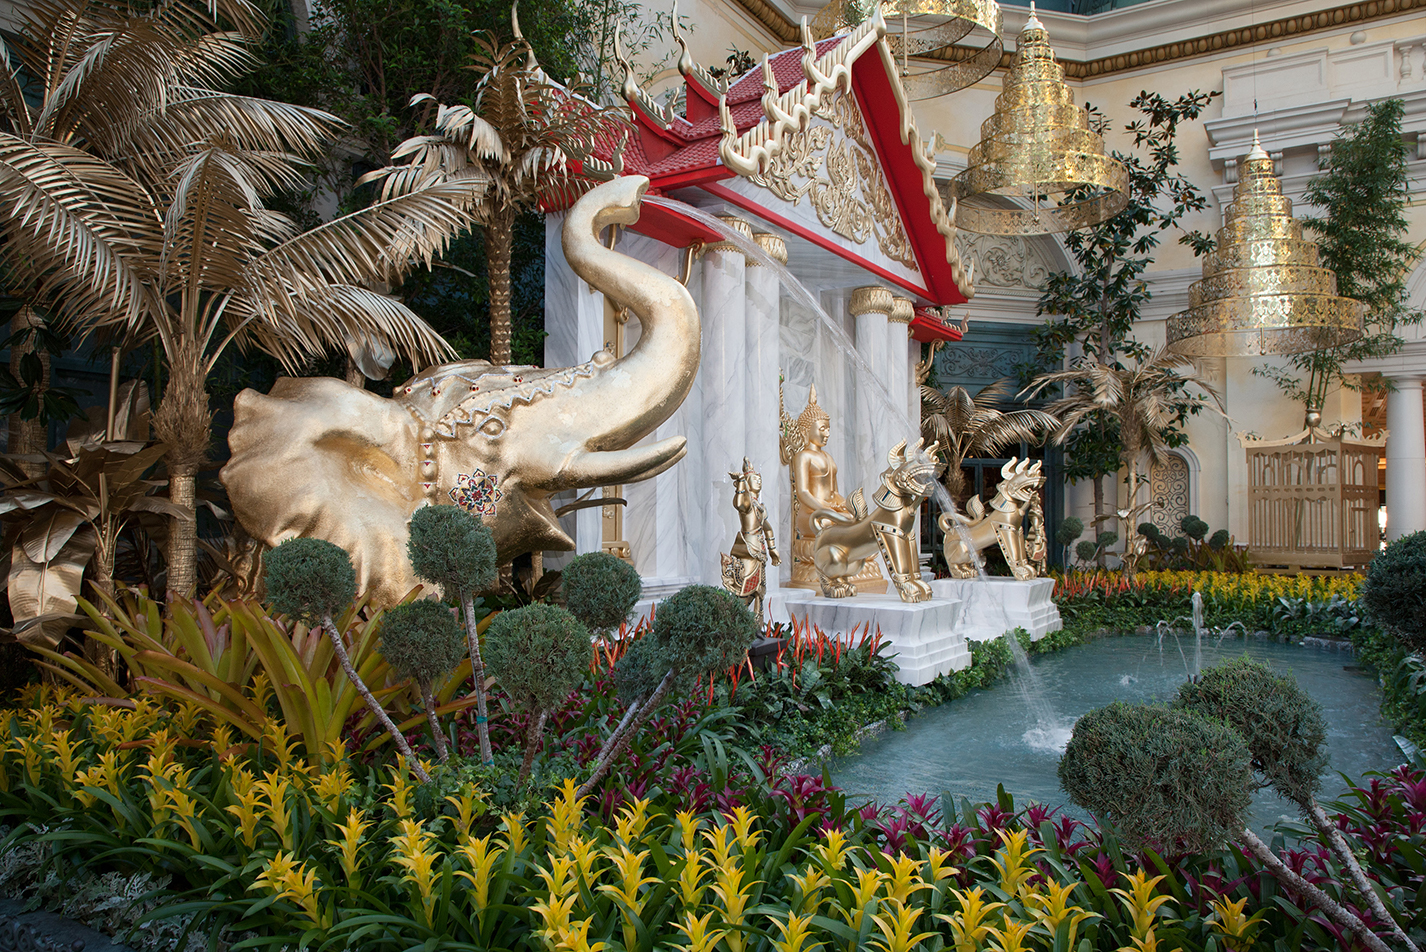 Las Vegas, NV/USA - 7 June 2020: Bellagio Conservatory Summer 2020  Installation with Japanese Decorations and Design Editorial Image - Image  of flower, 2020: 186297210